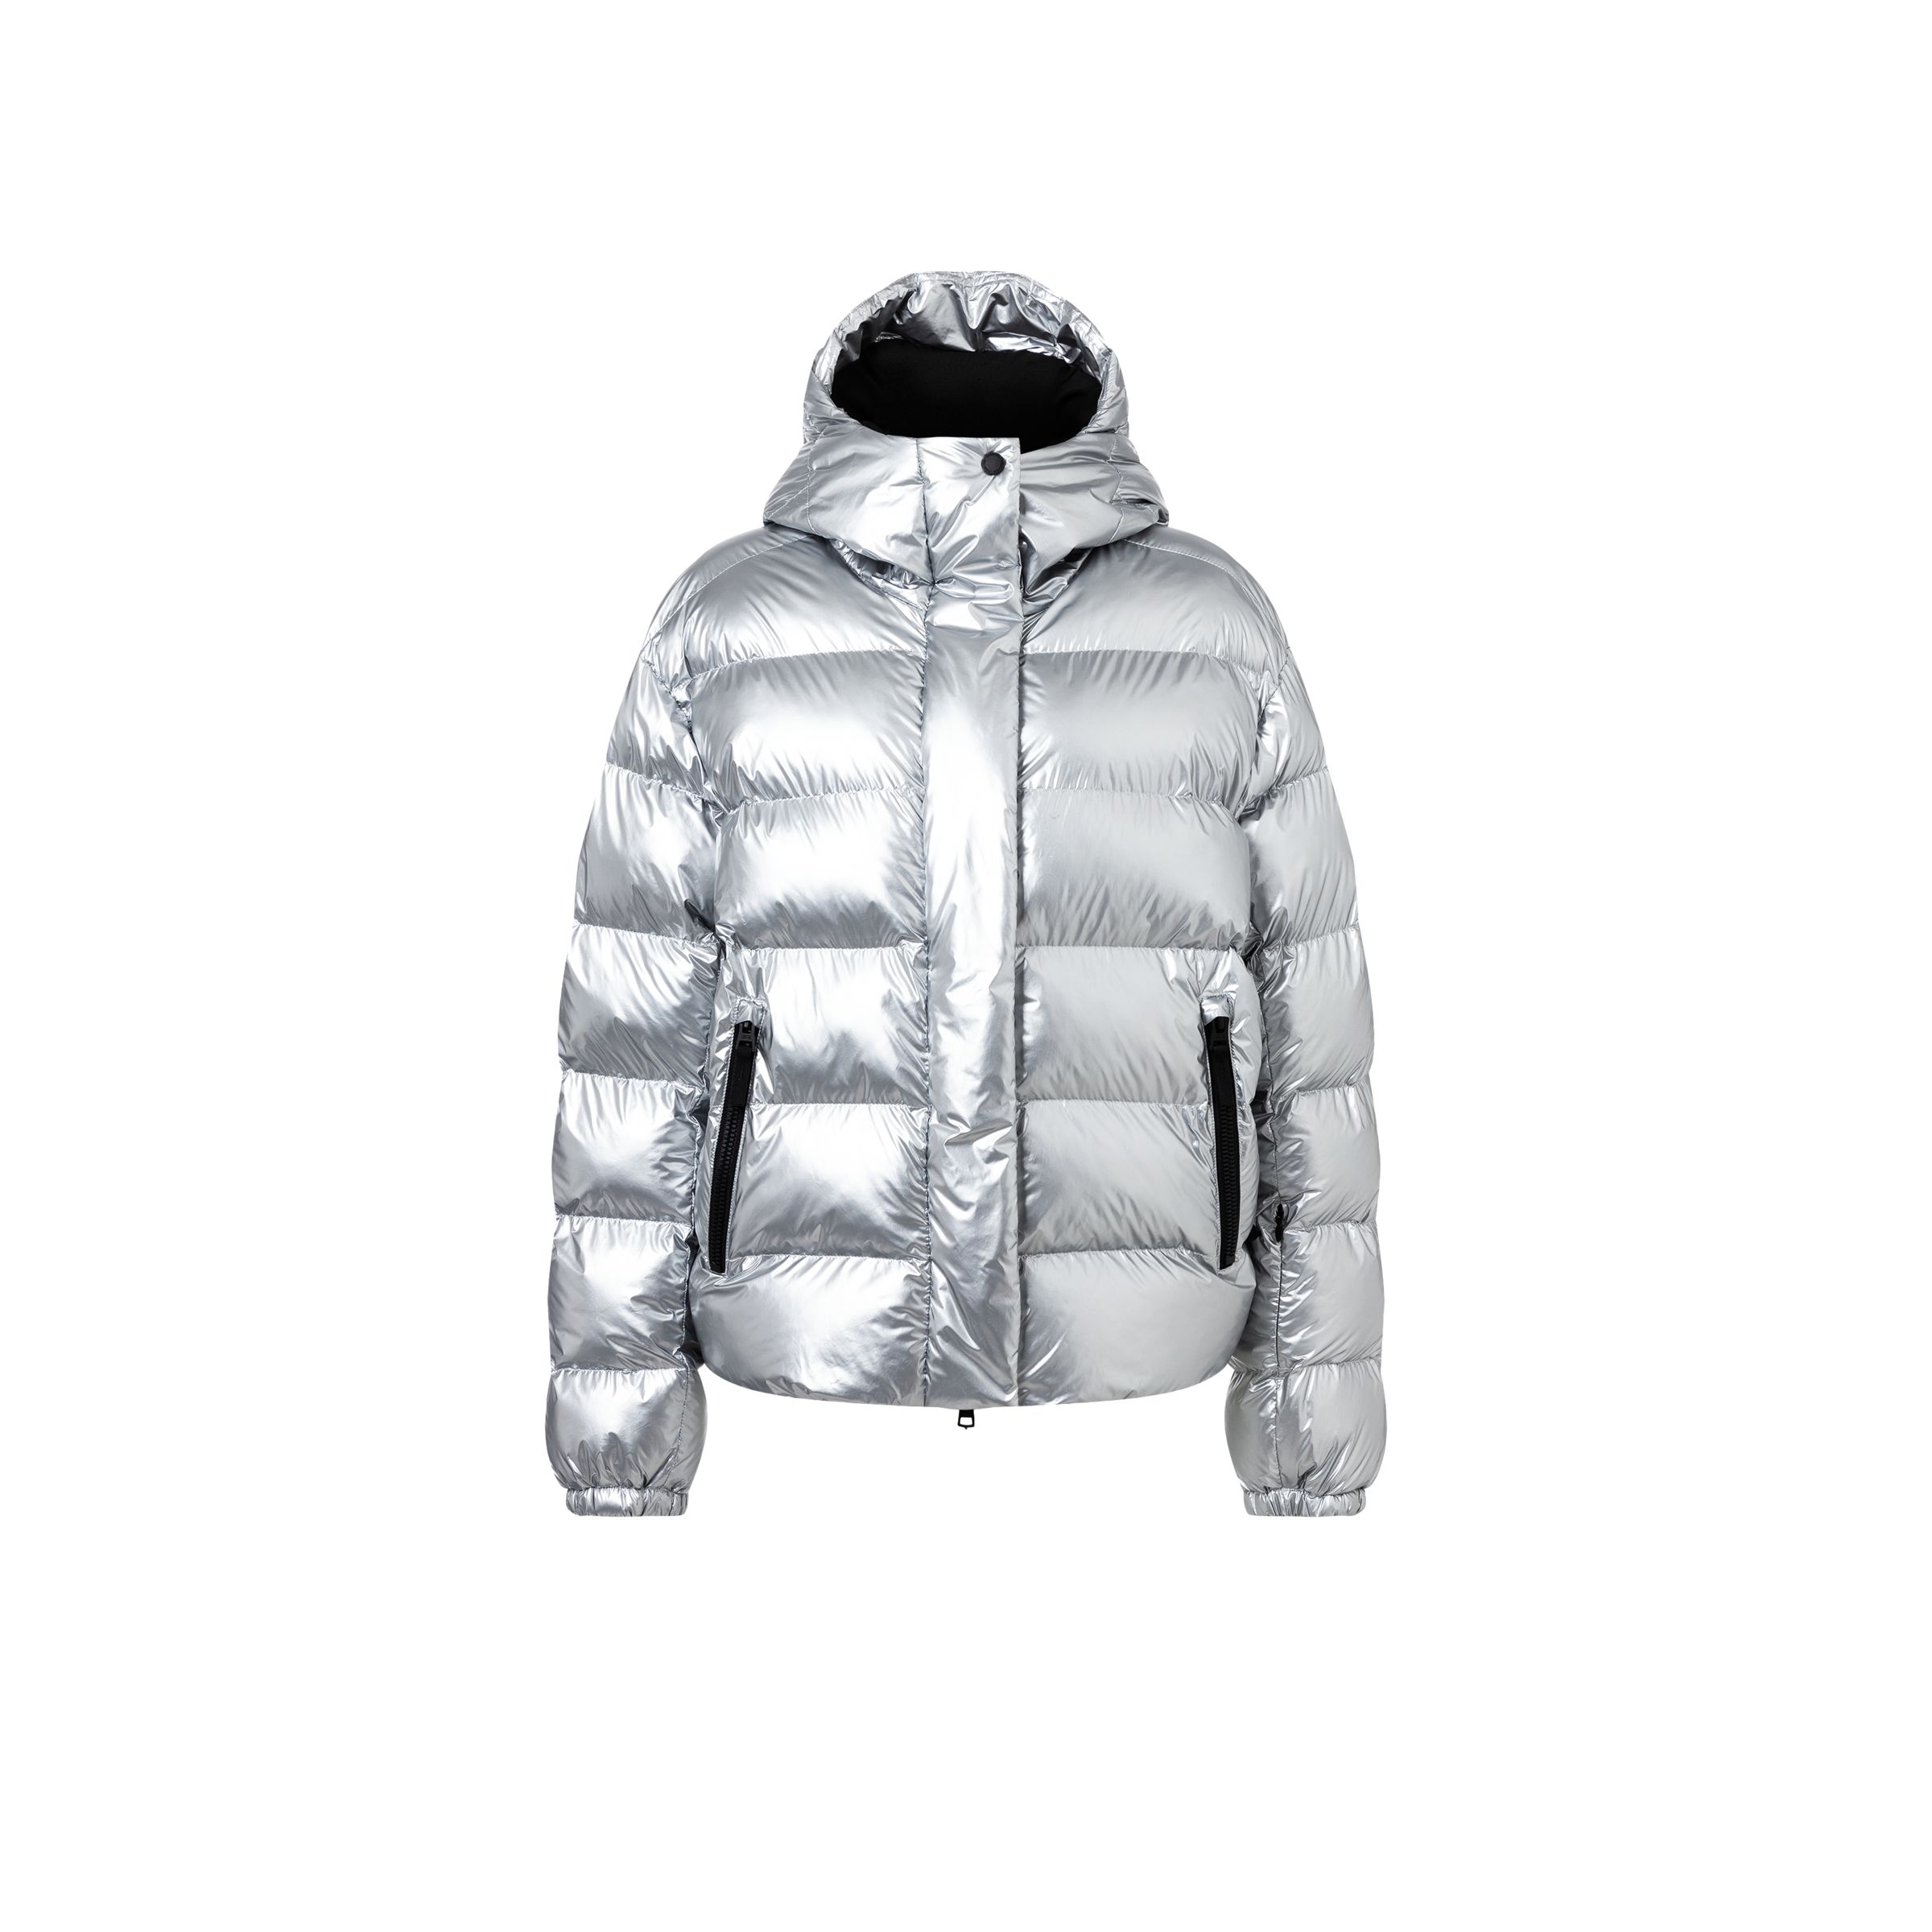 Geci Ski & Snow -  bogner fire and ice RANJA Quilted Ski Jacket